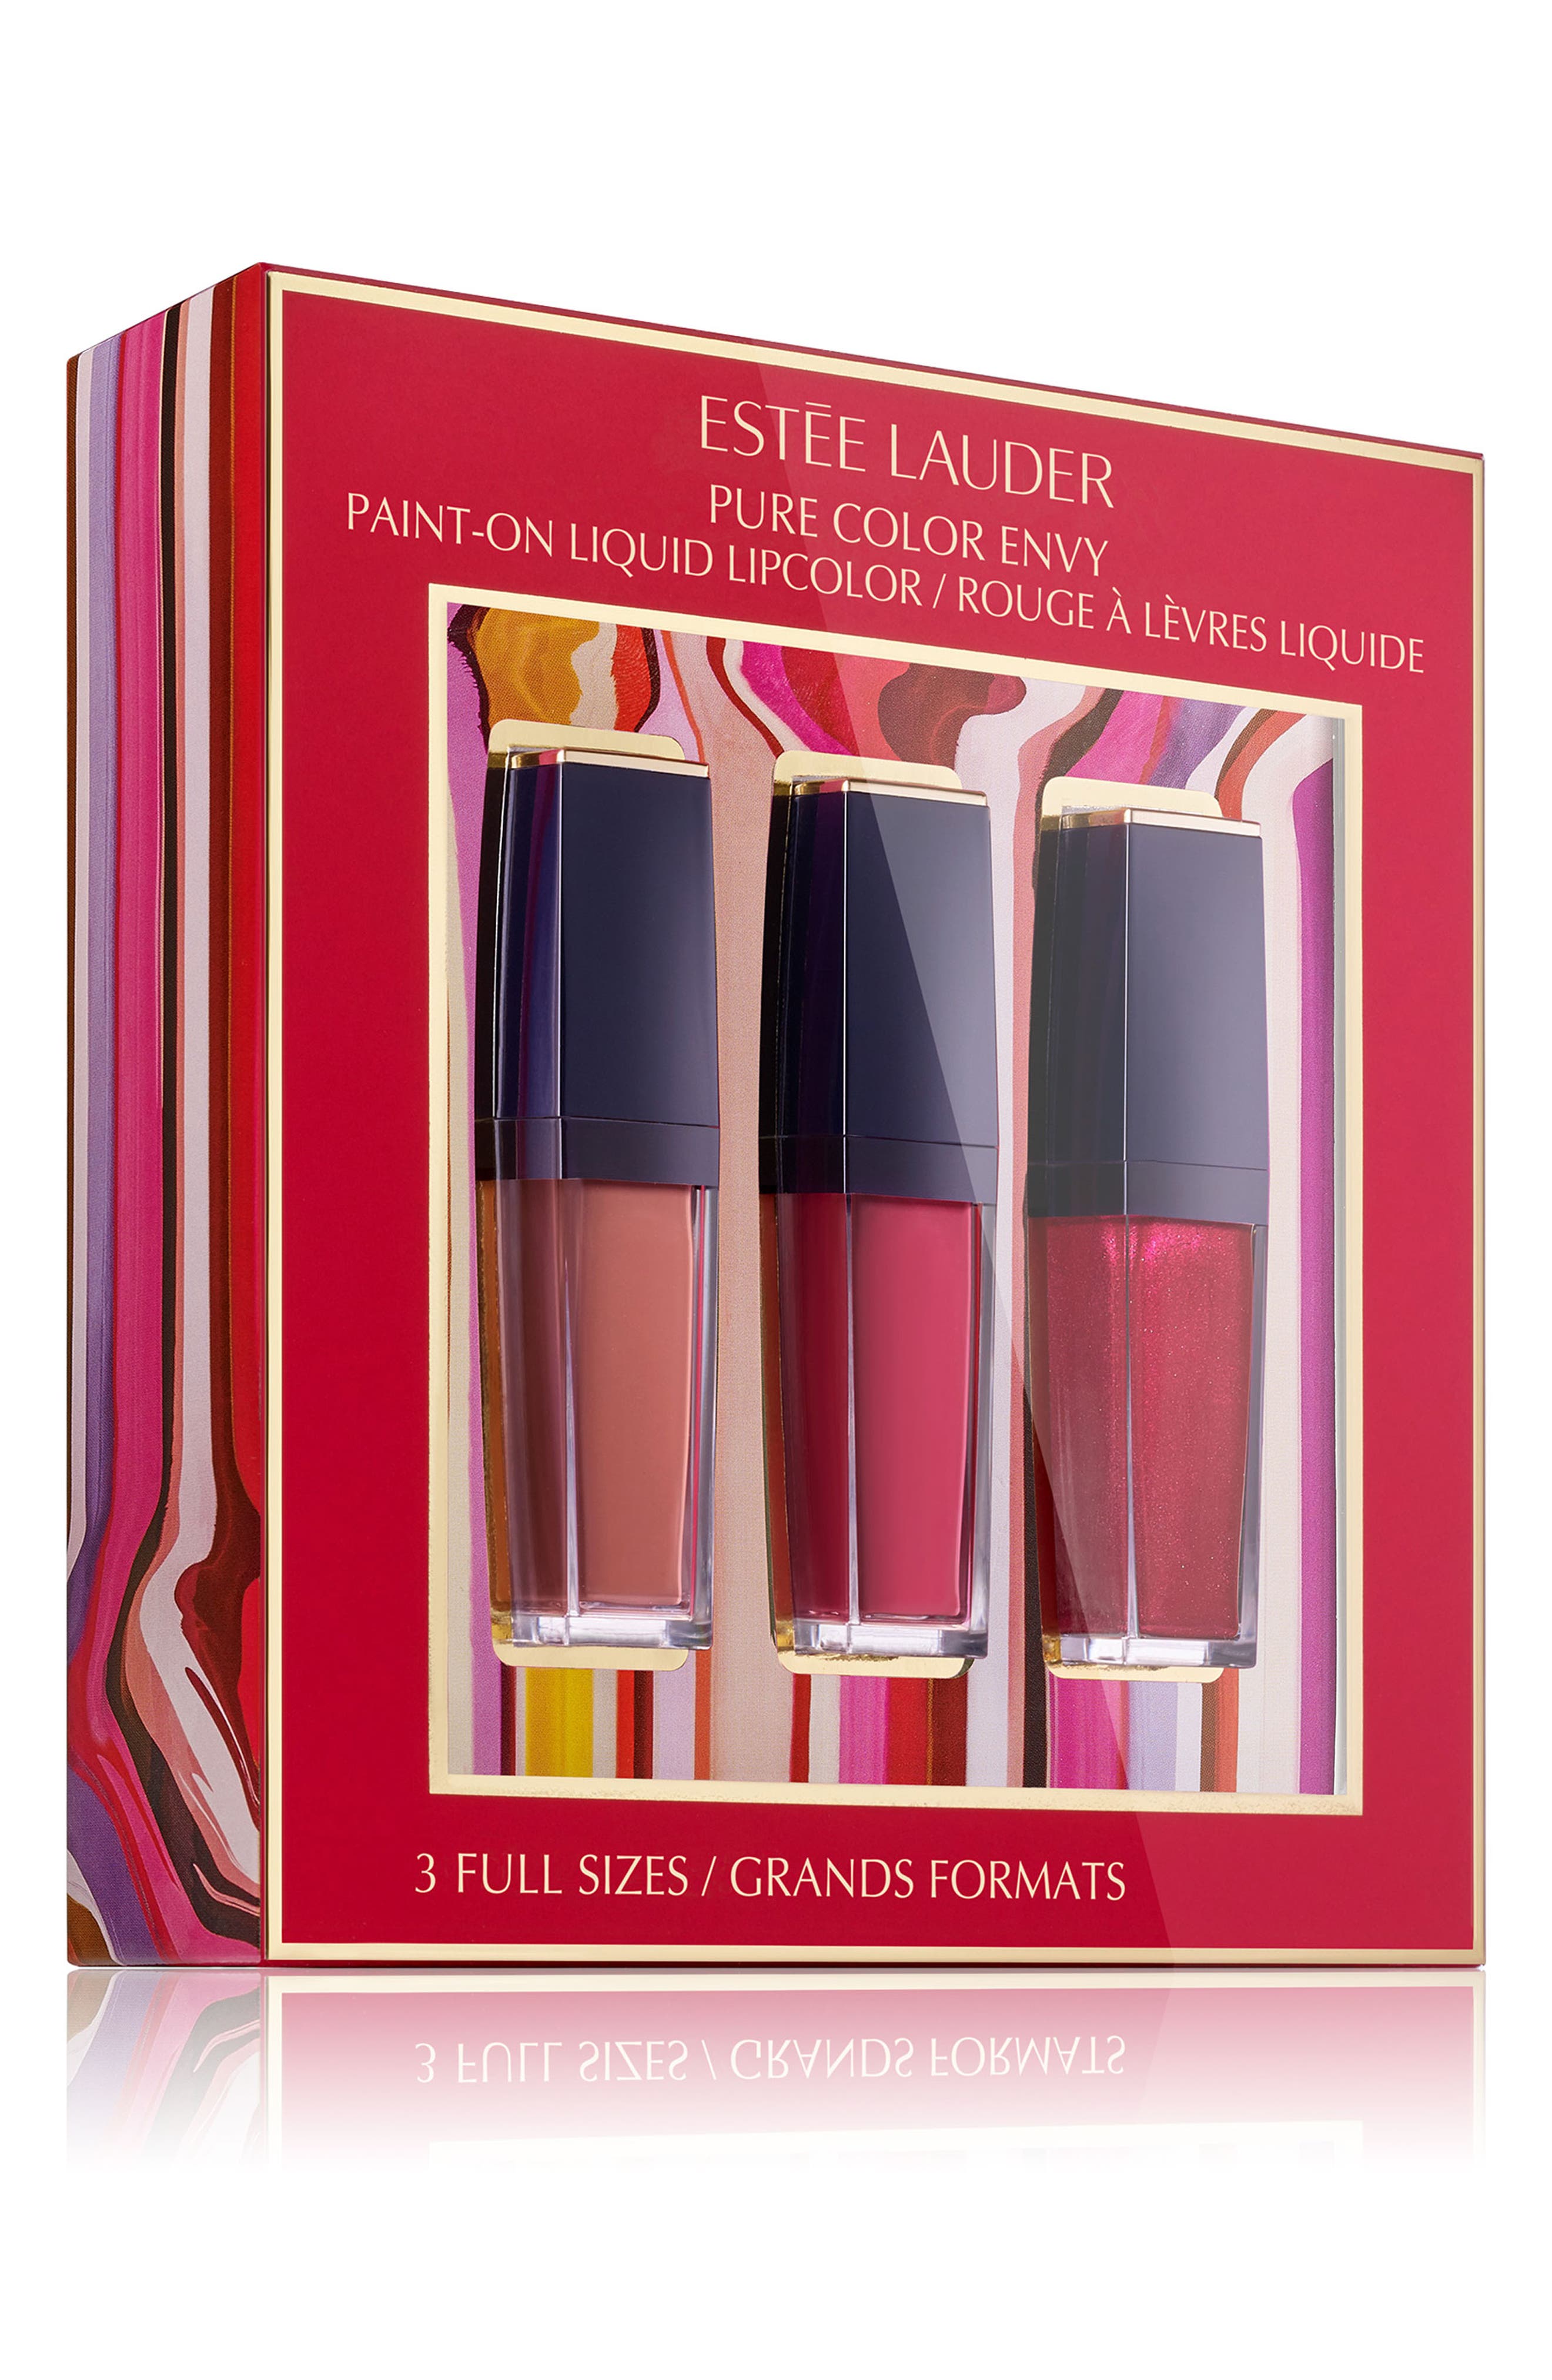 UPC 887167419414 product image for Estee Lauder Pure Color Envy Paint-On Liquid Lip Color Collection at Nordstrom | upcitemdb.com